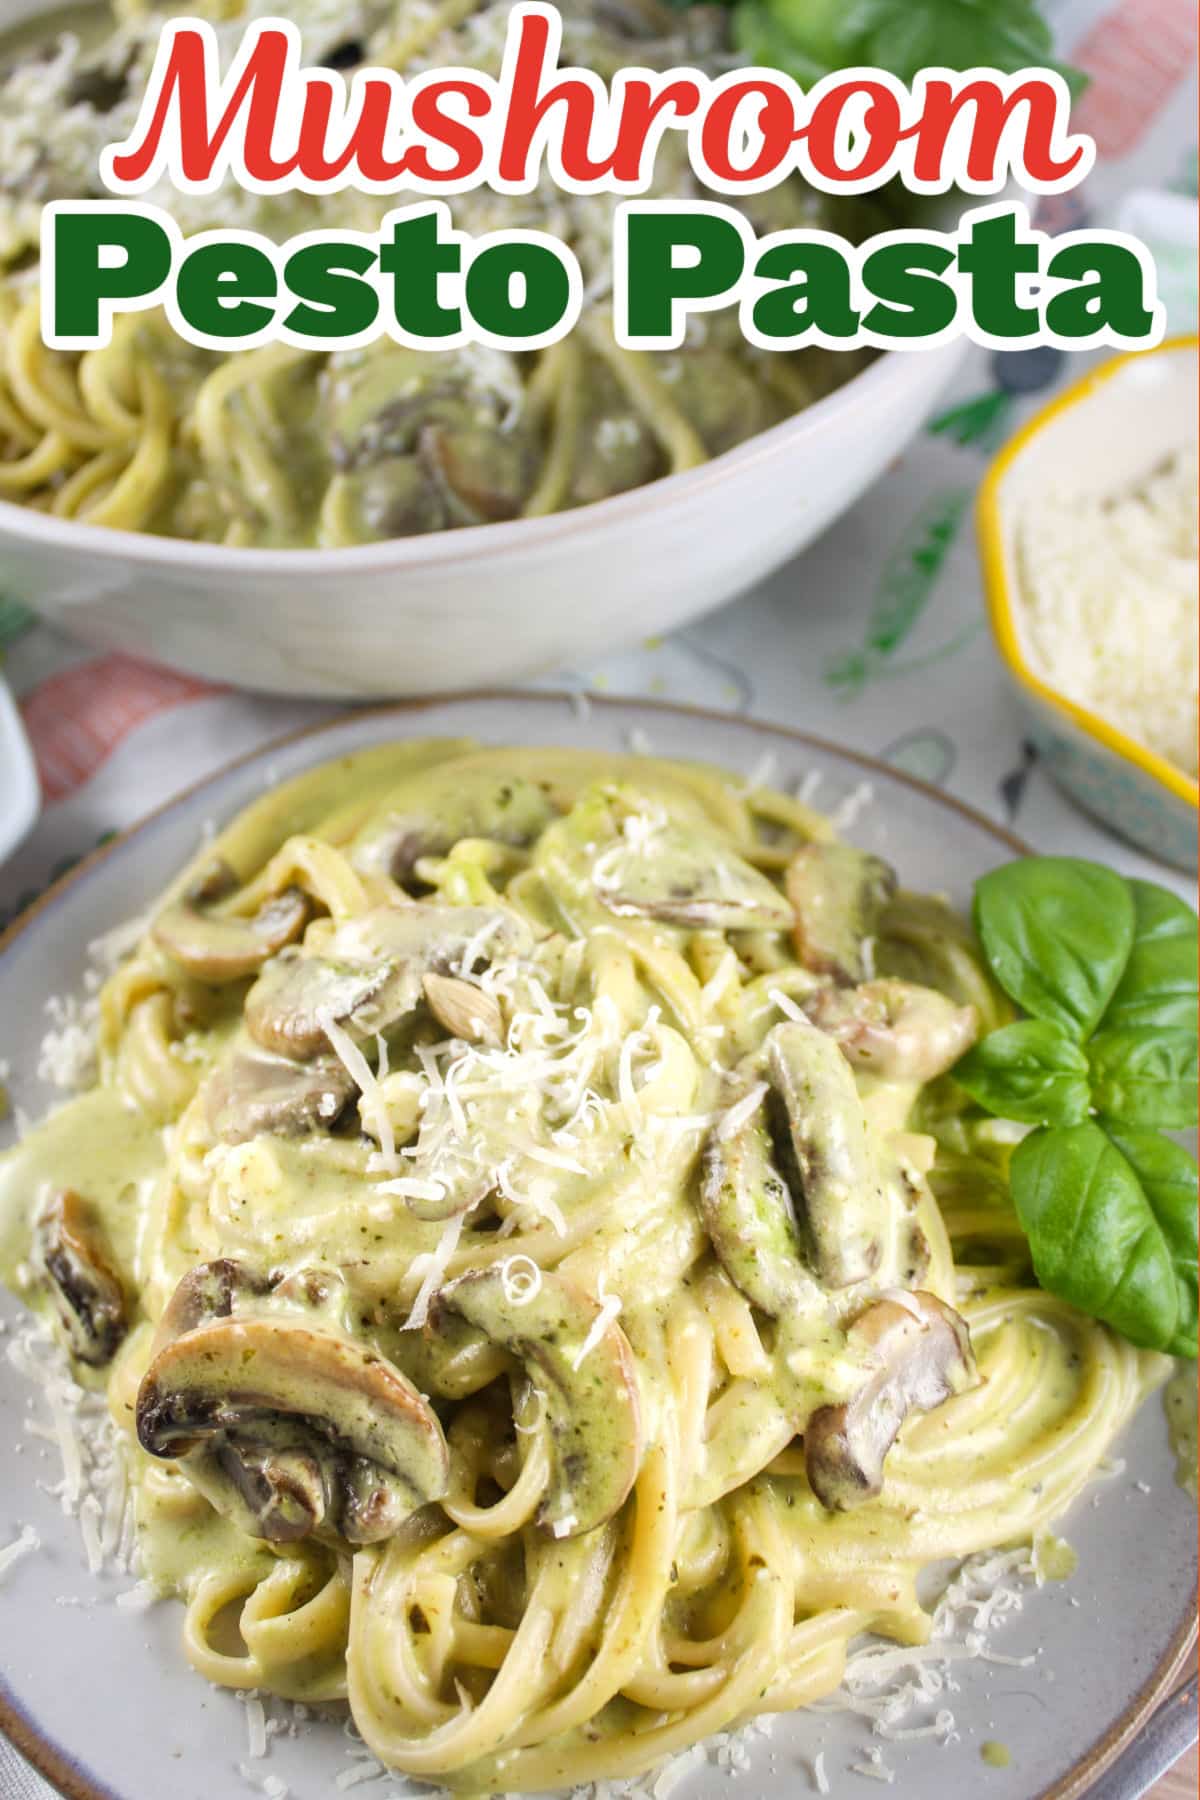 Creamy Mushroom Pesto Pasta is a one-pot 20 minute meal! I've got all the tips to make fresh pesto - or you can grab a jar of store-bought for a time saver. This simple mushroom pesto pasta will quickly become a favorite meatless meal! via @foodhussy